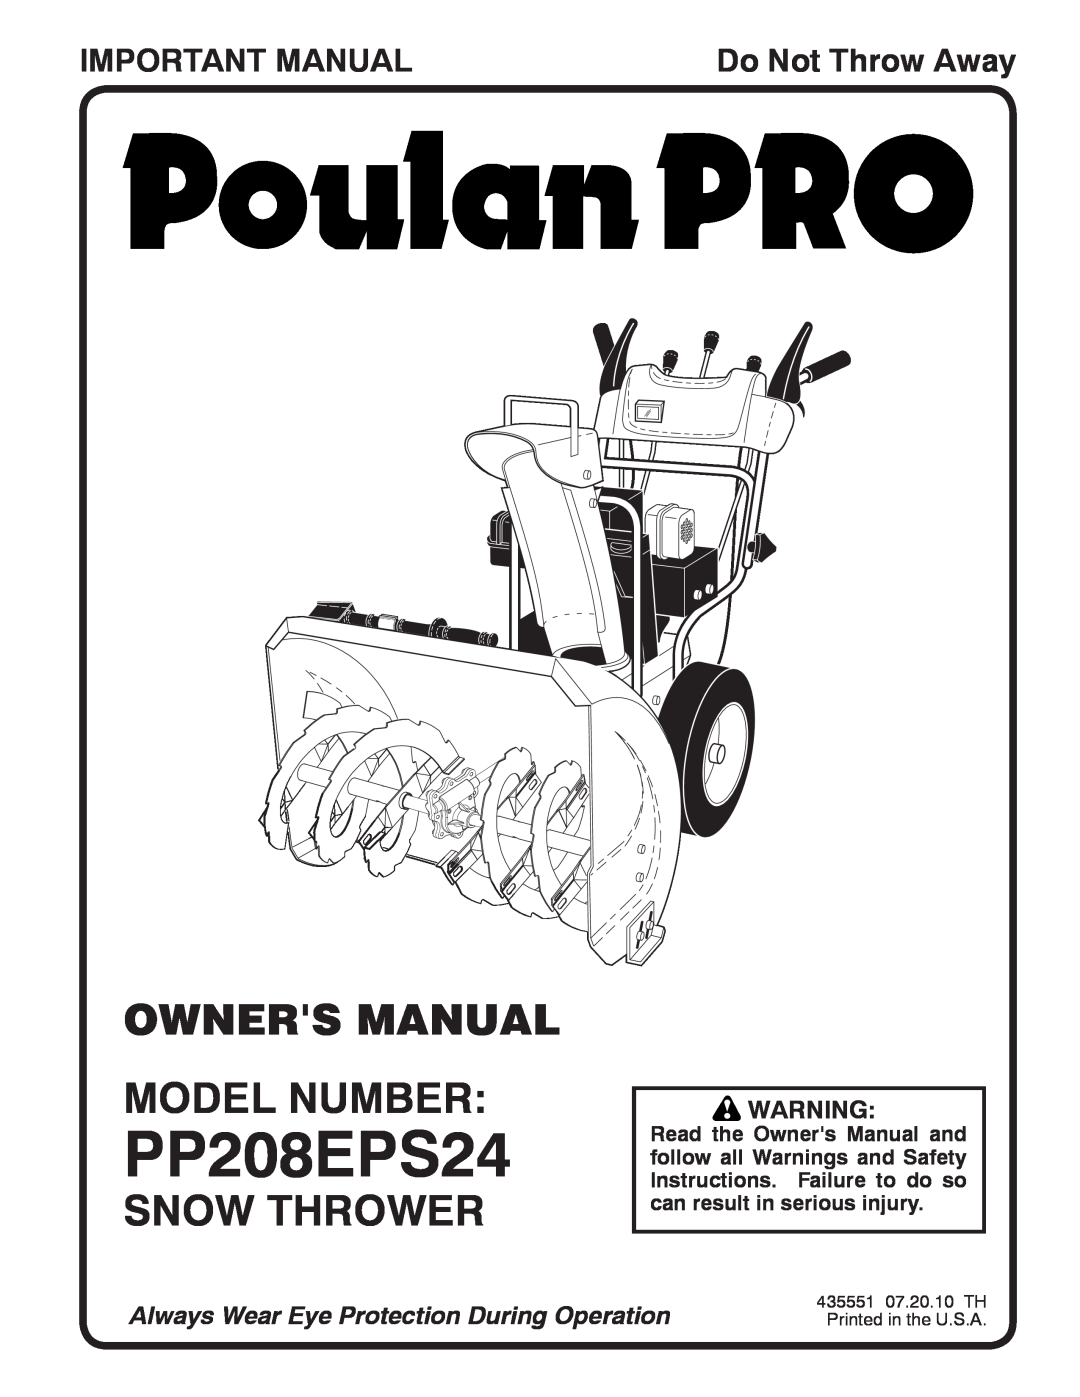 Poulan 435551 owner manual Snow Thrower, Important Manual, PP208EPS24, Do Not Throw Away 